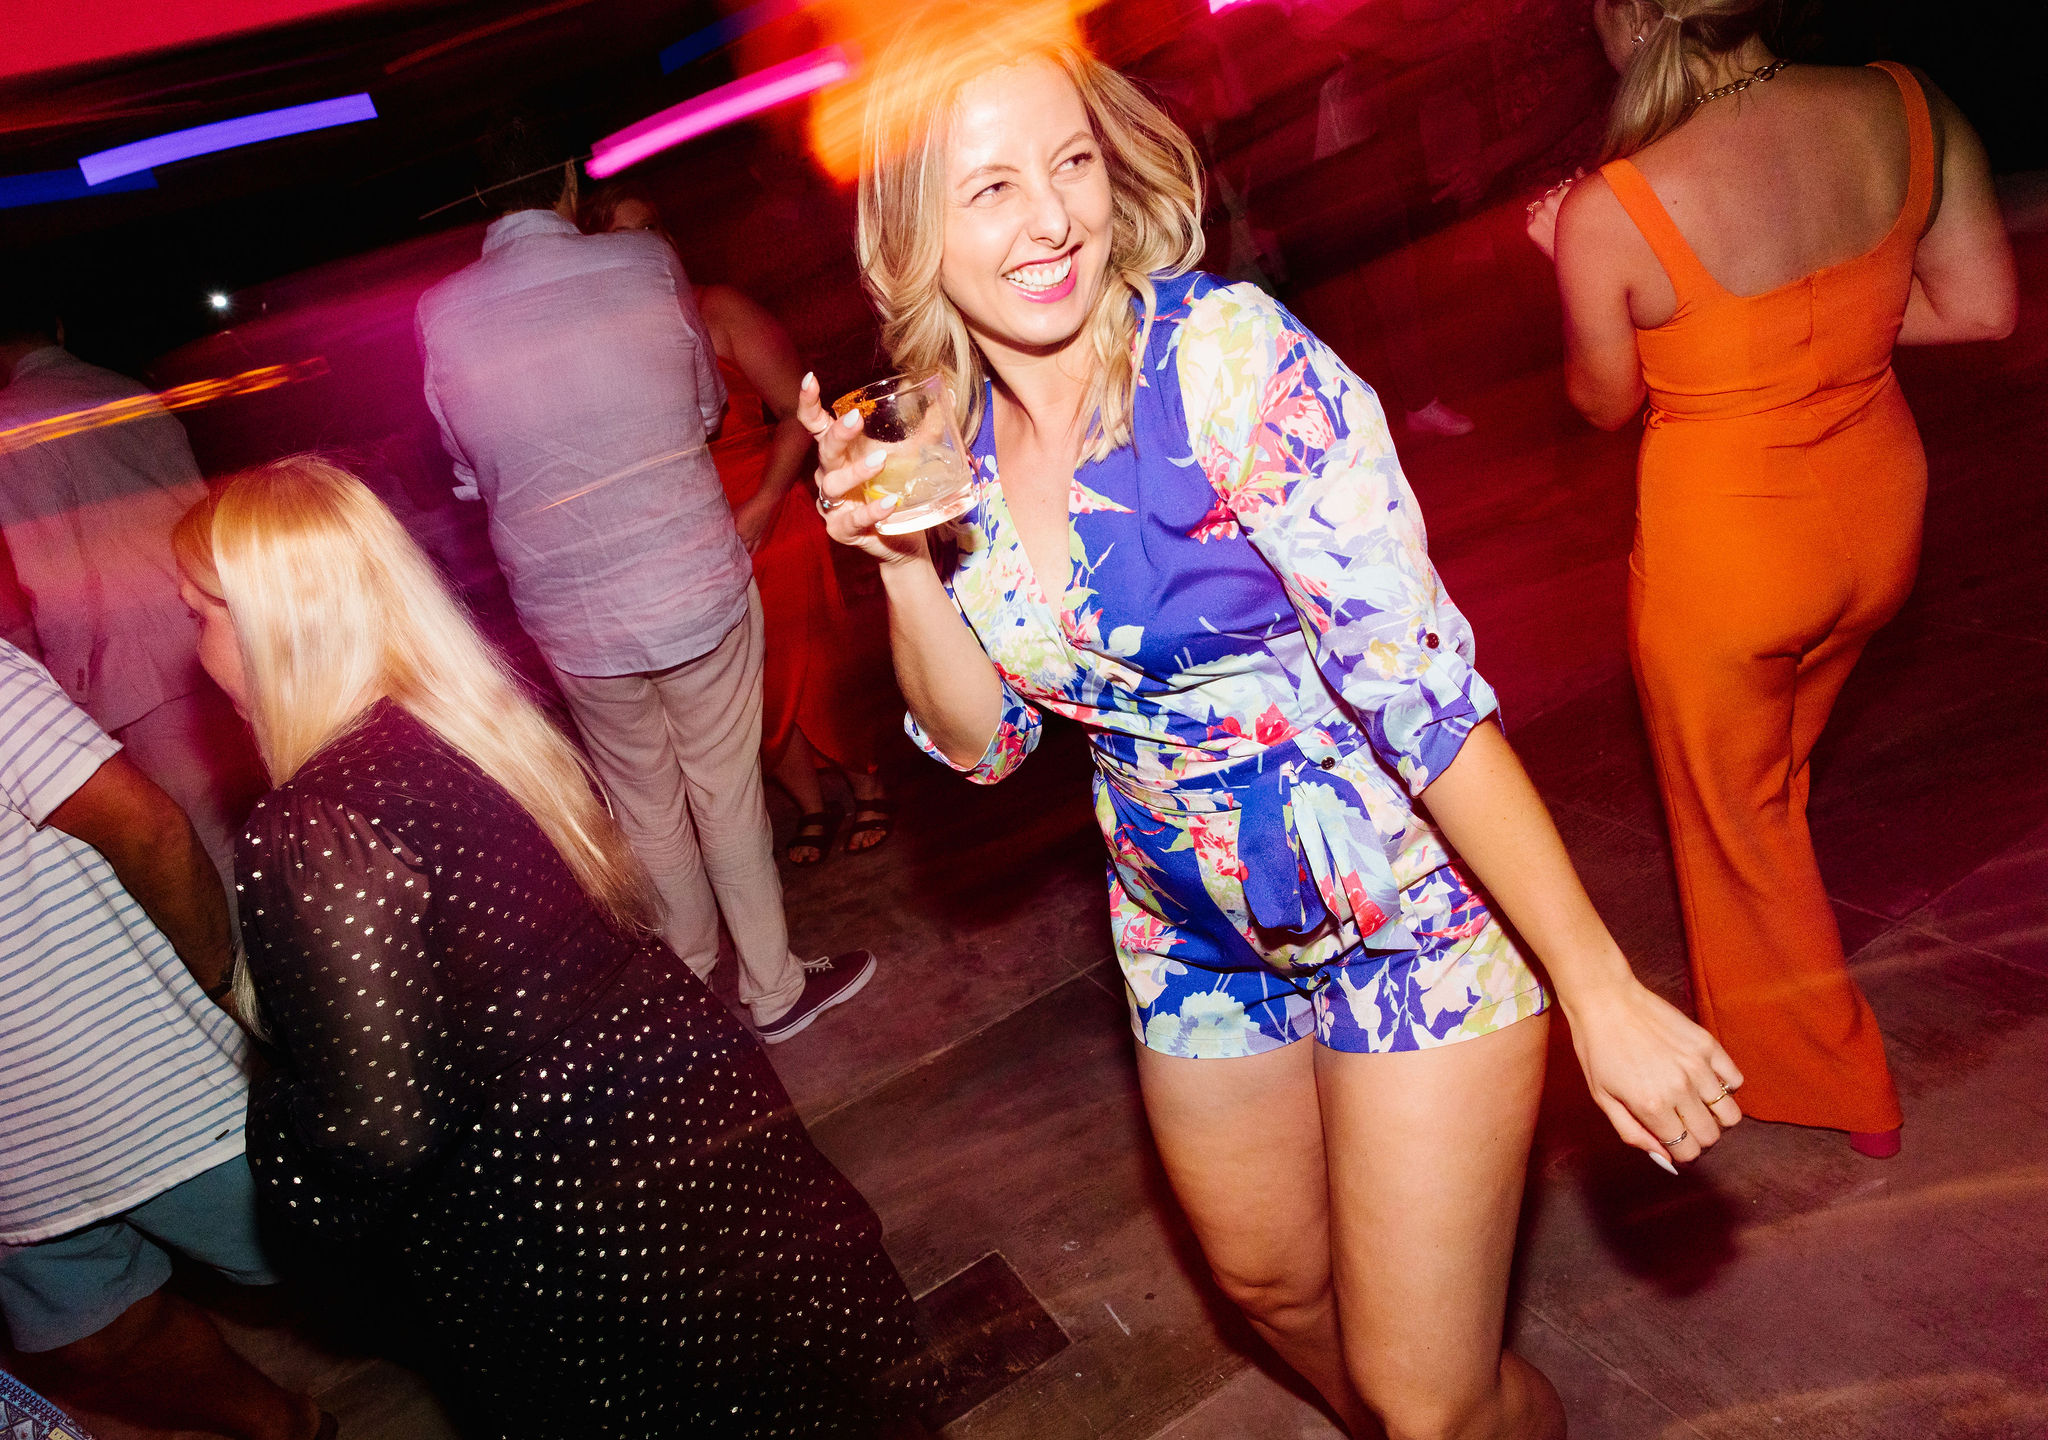 blurry style dance floor photo girl holding drinking big smile candid dance photo colorful wedding guest outfit